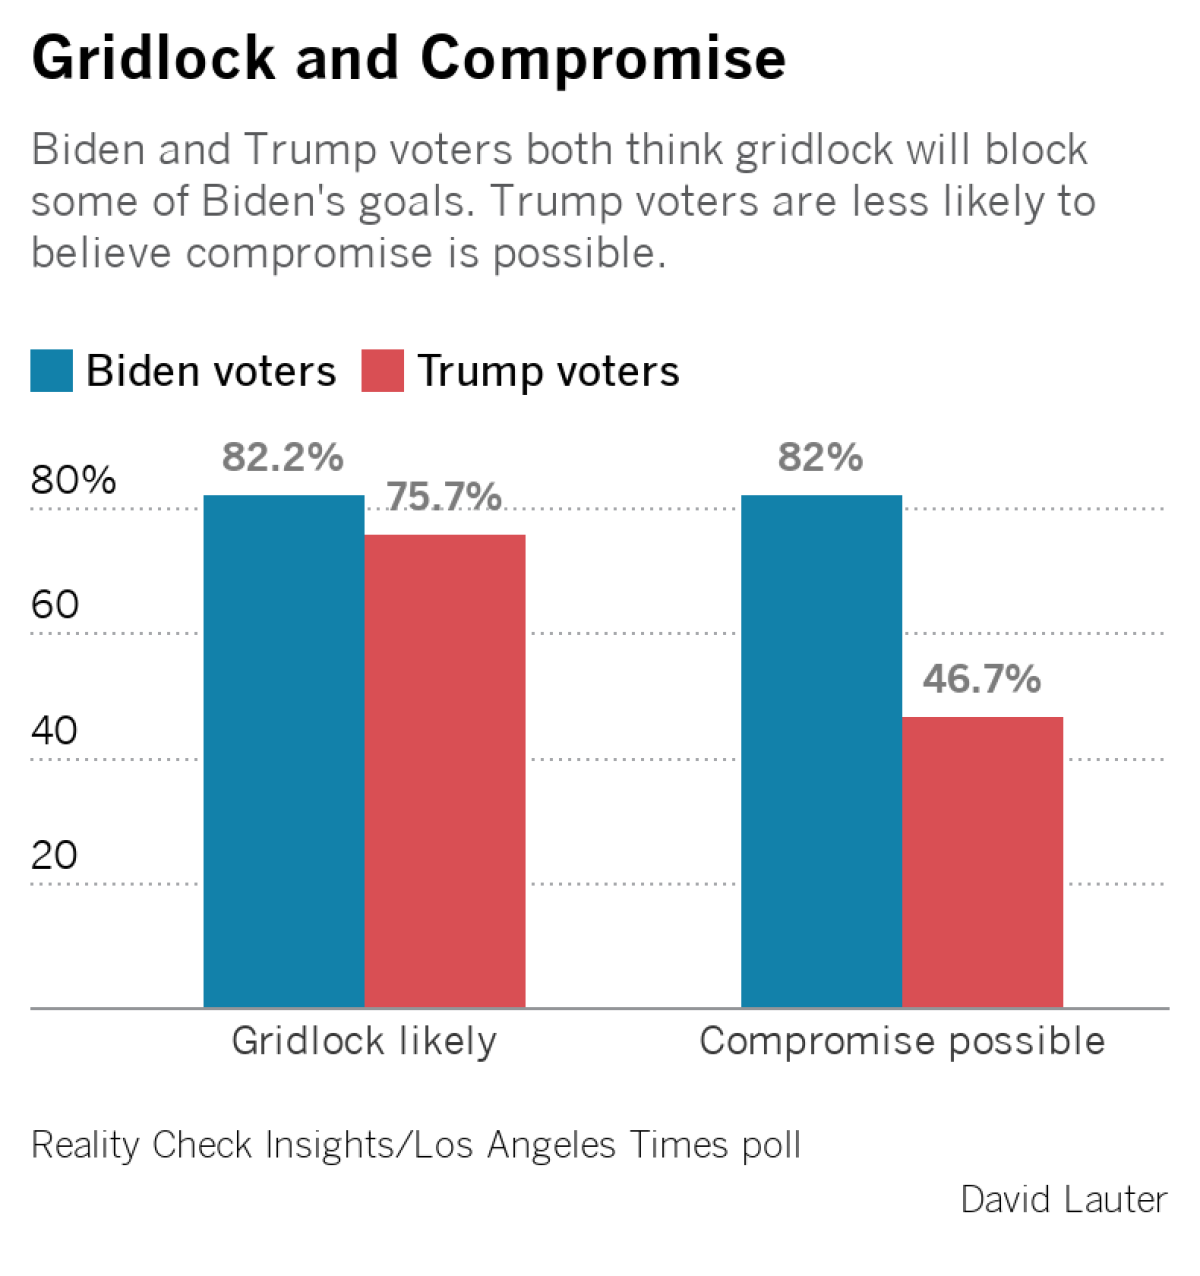 Poll chart shows views on gridlock and compromise.